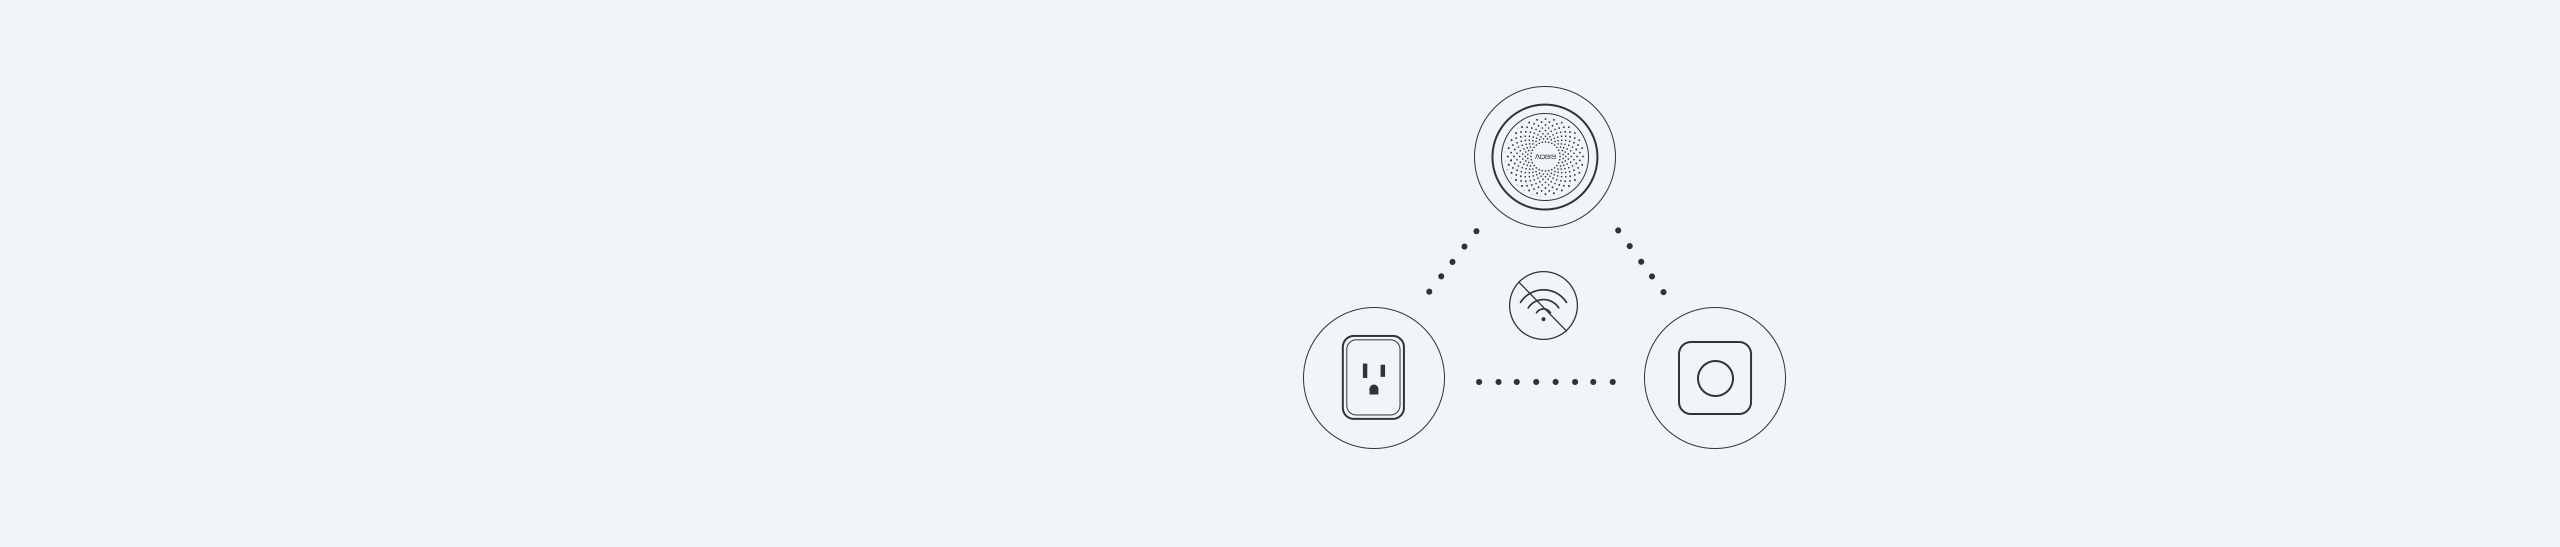 Zigbee smart plug ensures local connection even if Internet is disconnected